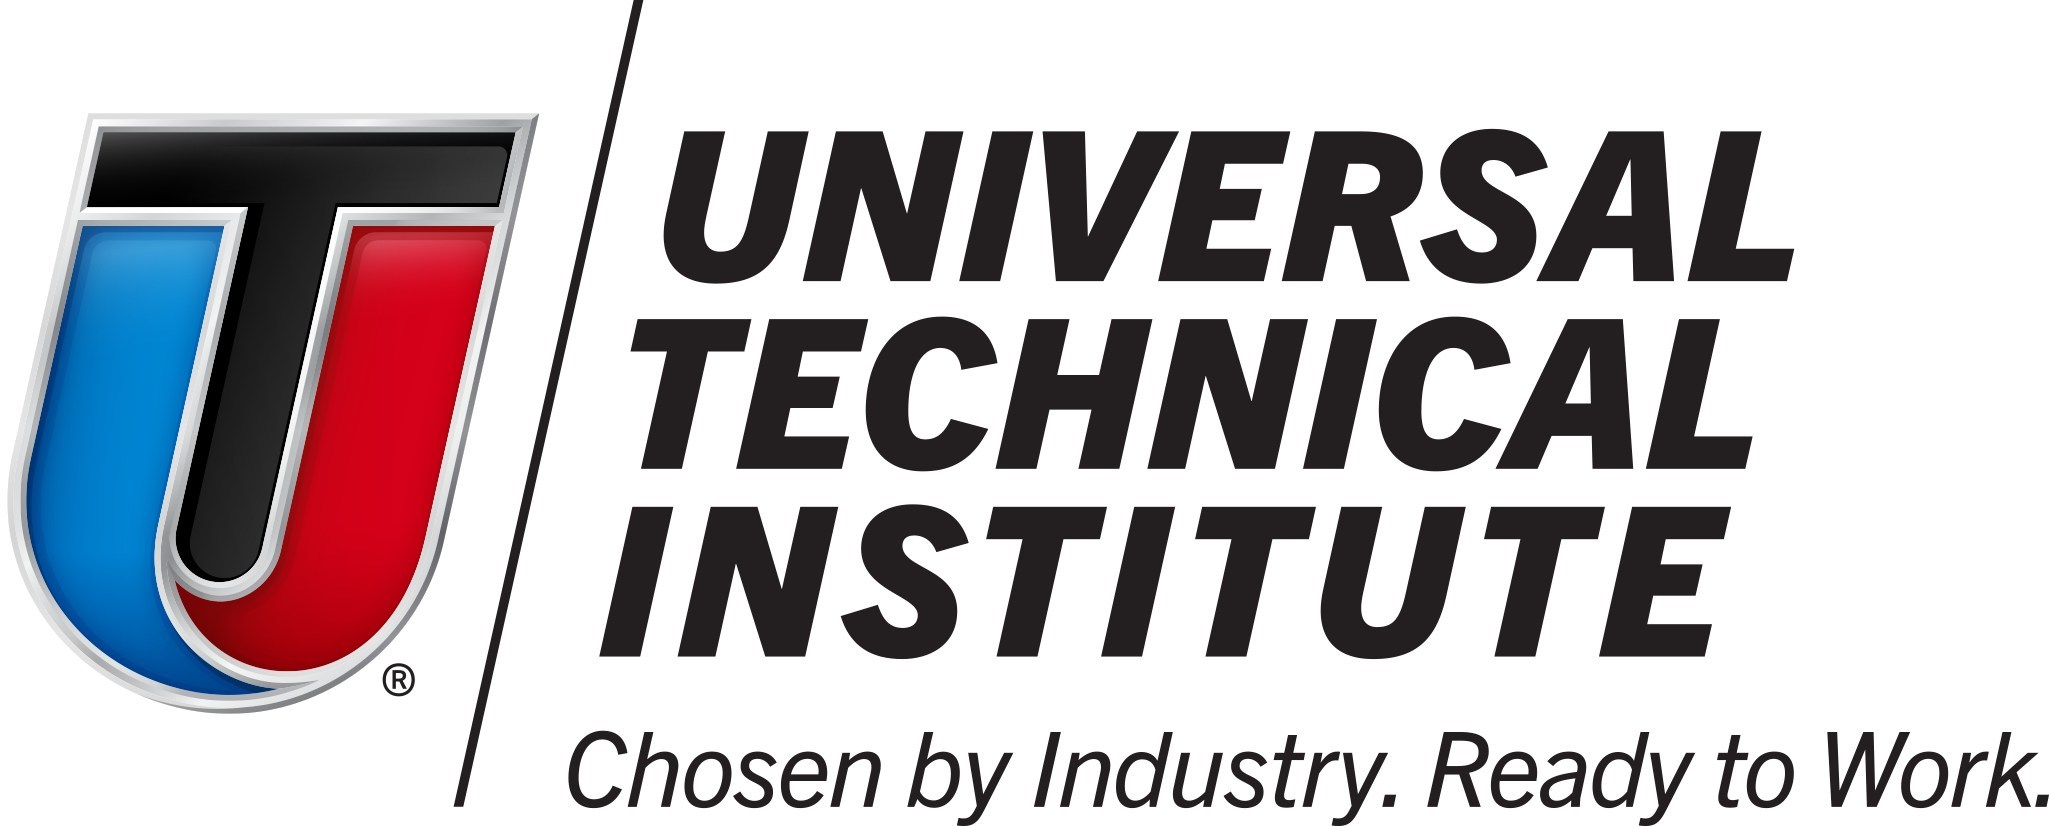 download universal technical institute